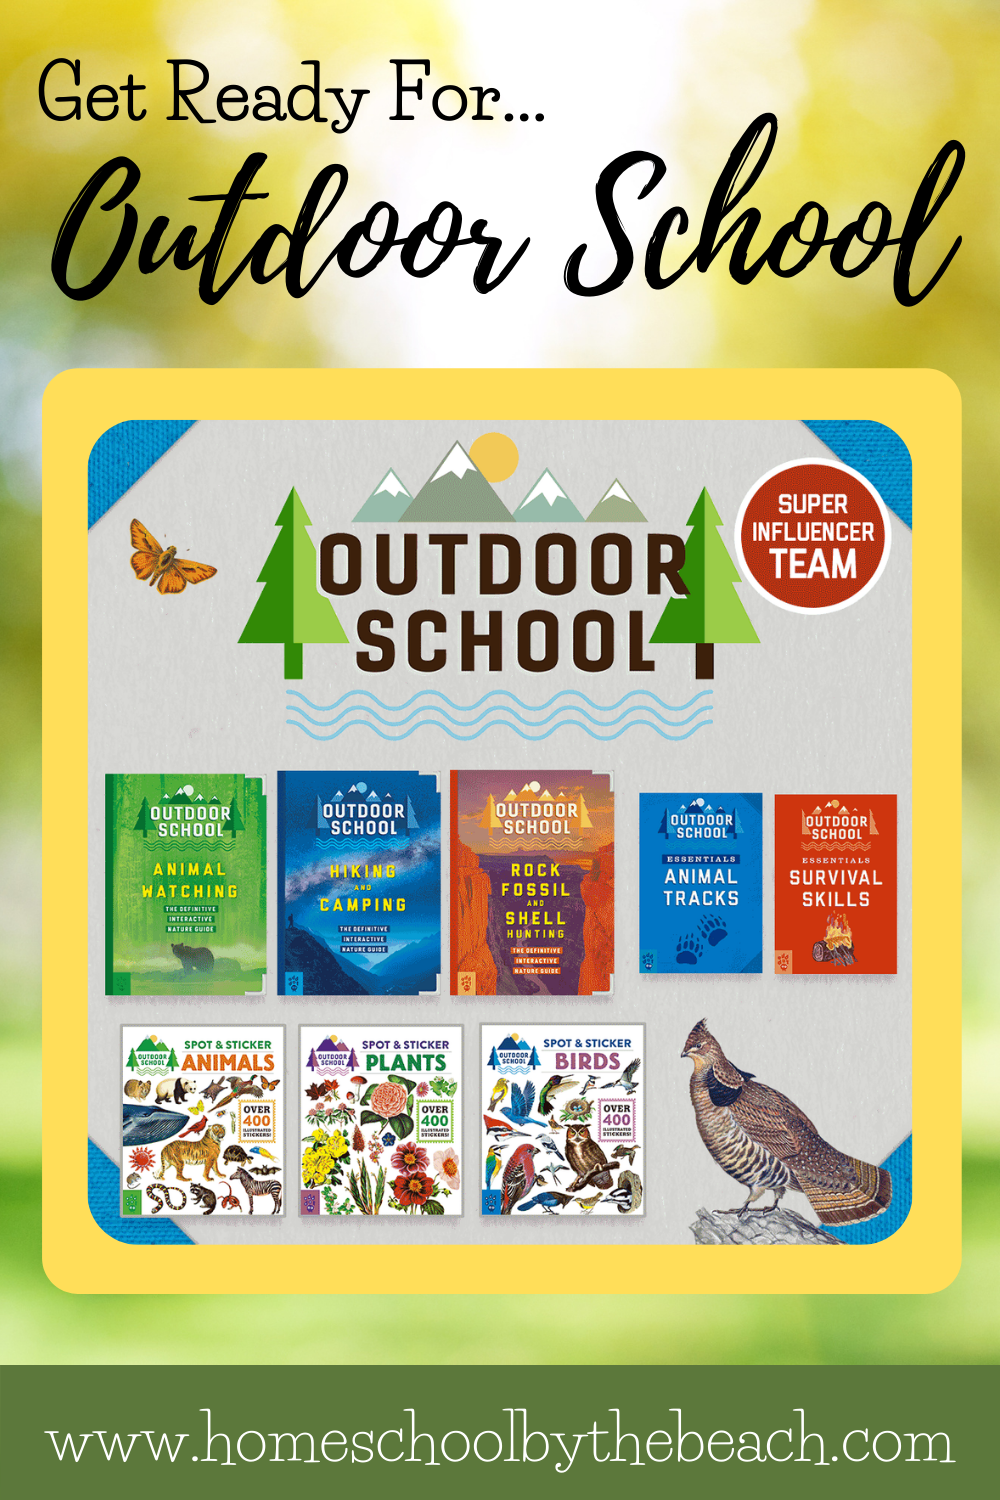 Get Ready for Outdoor School!